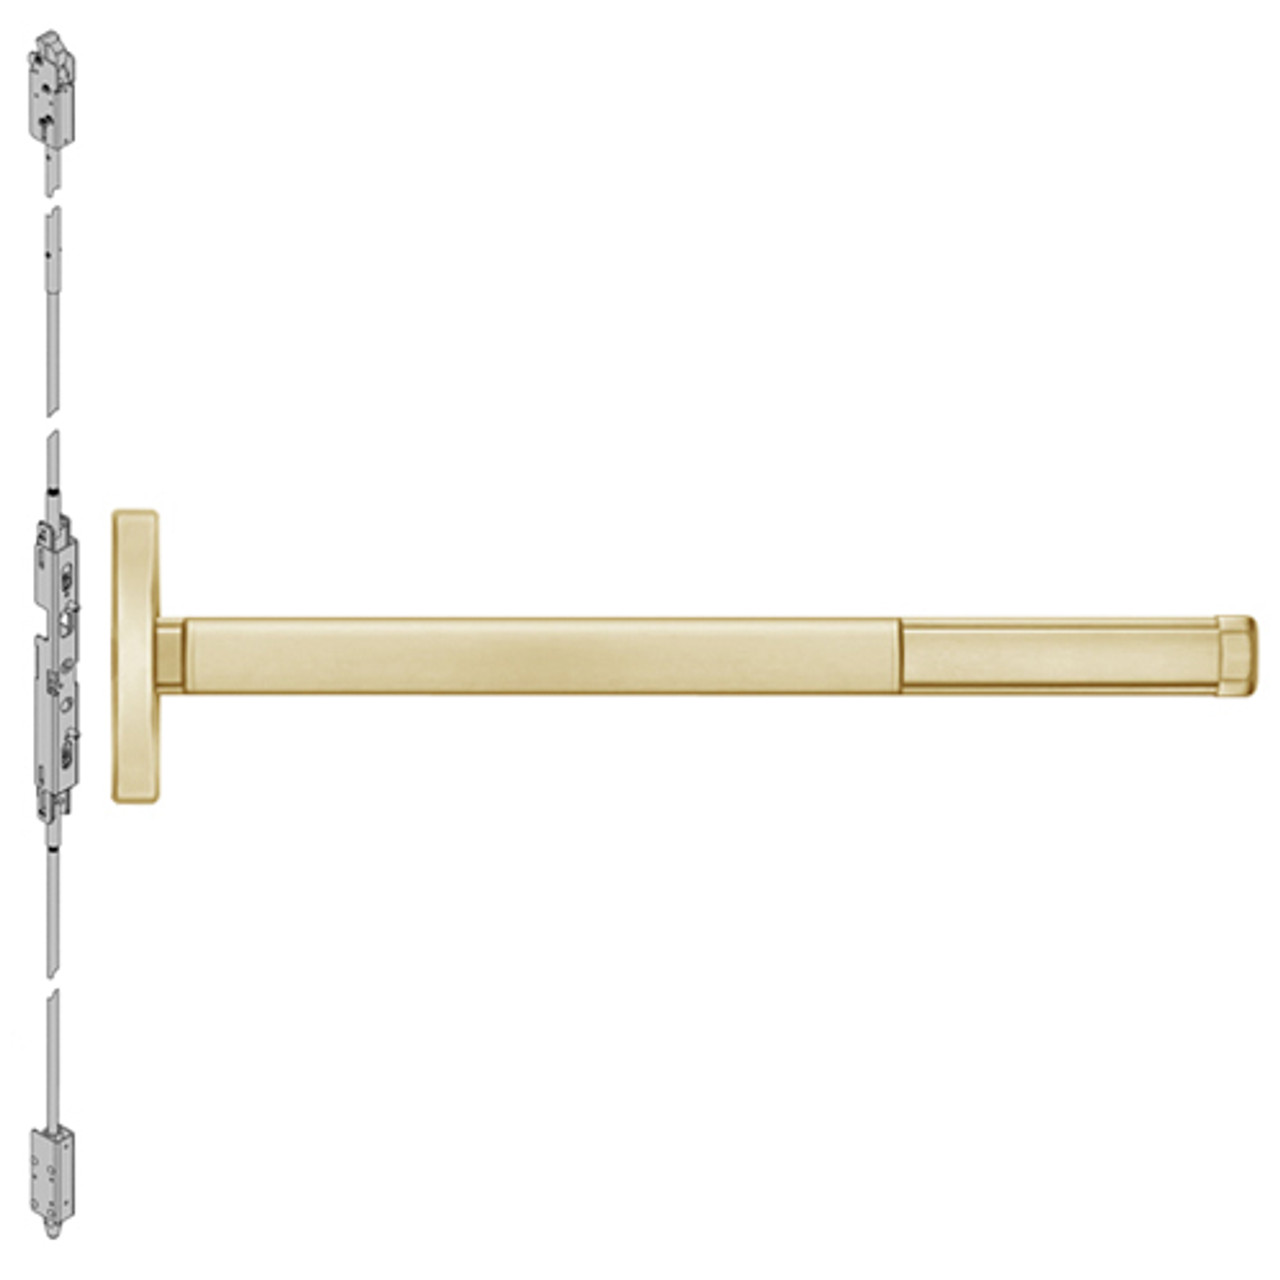 DEFL2614LBR-606-36 PHI 2600 Series Fire Rated Concealed Vertical Rod Exit Device with Delayed Egress Prepped for Lever Always Active in Satin Brass Finish